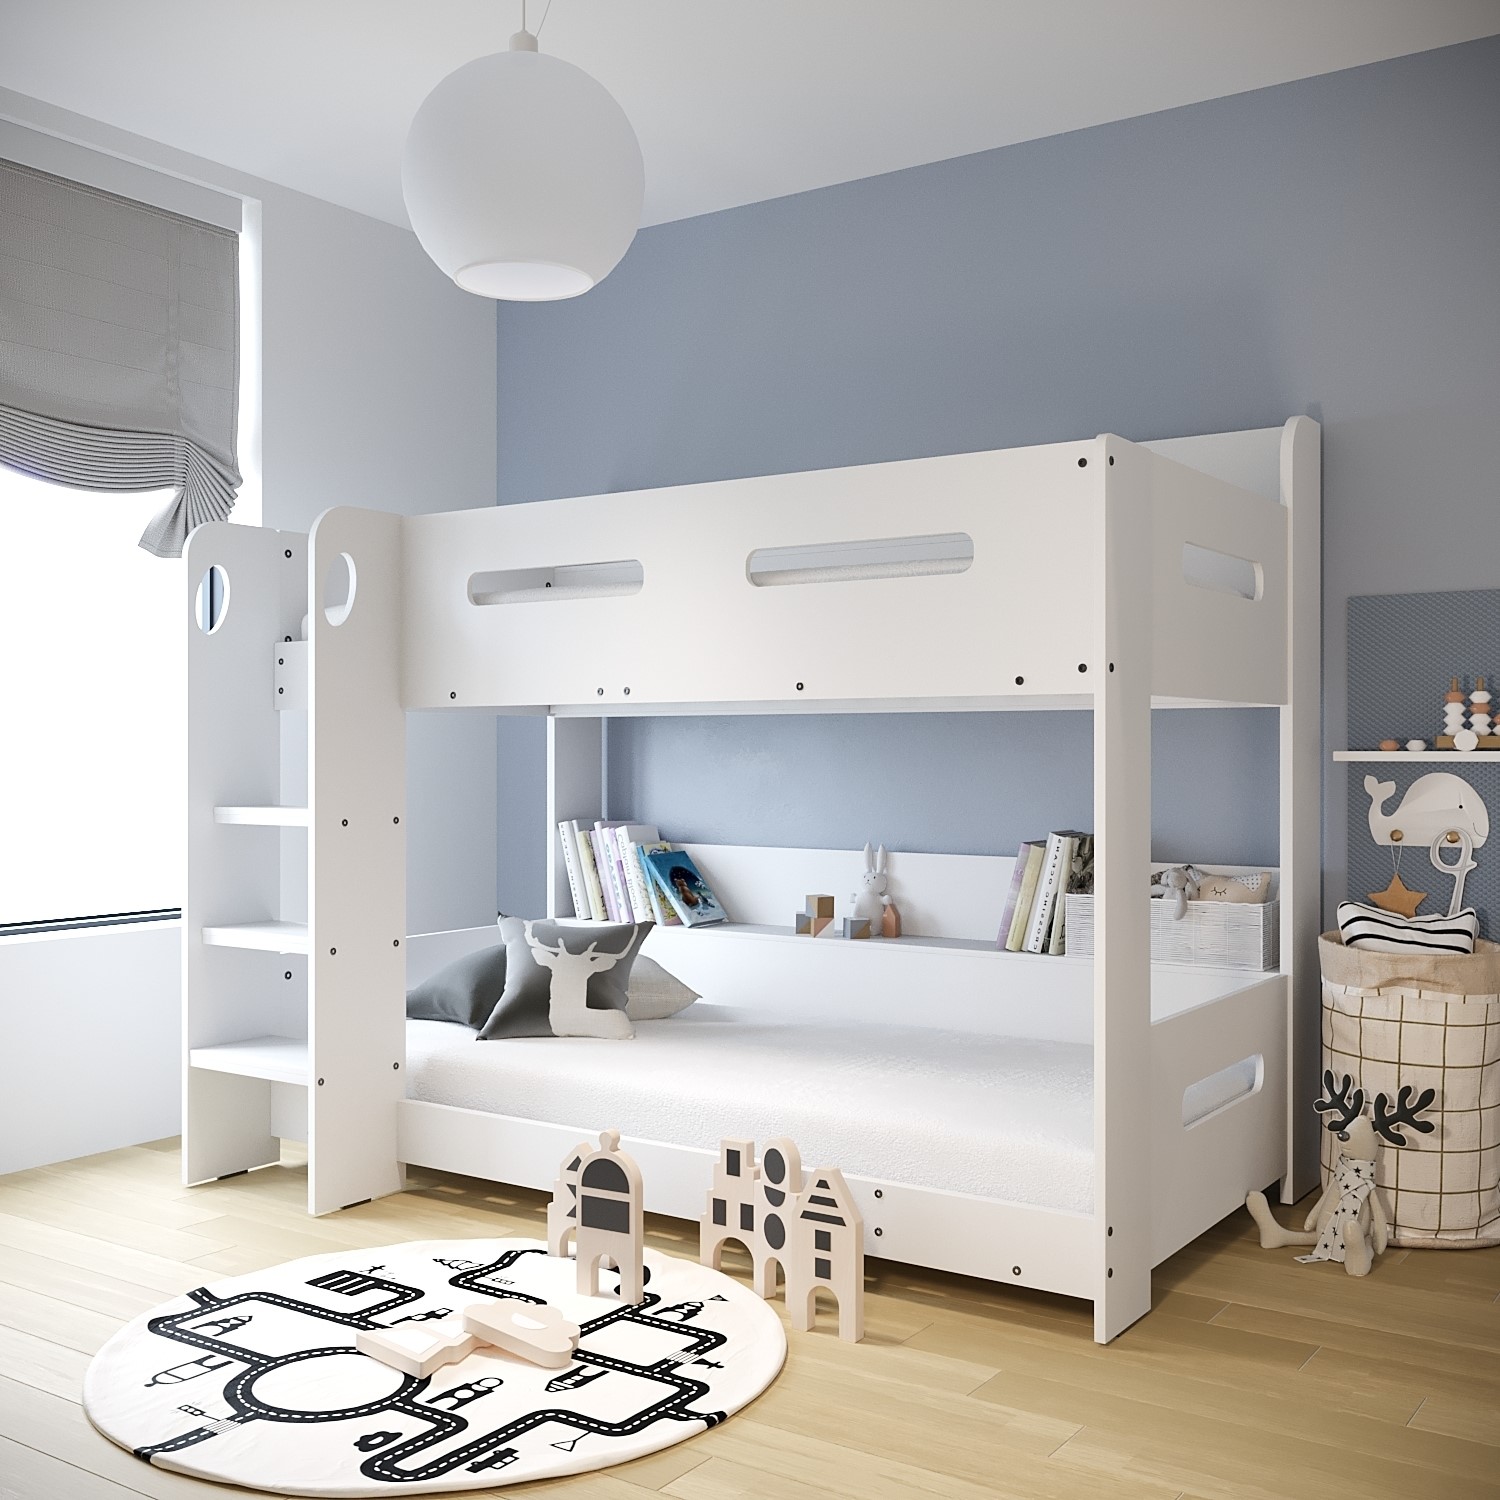 Sky White Bunk Bed Ladder Can Be, Girls Loft Bed With A Desk And Vanity Uk